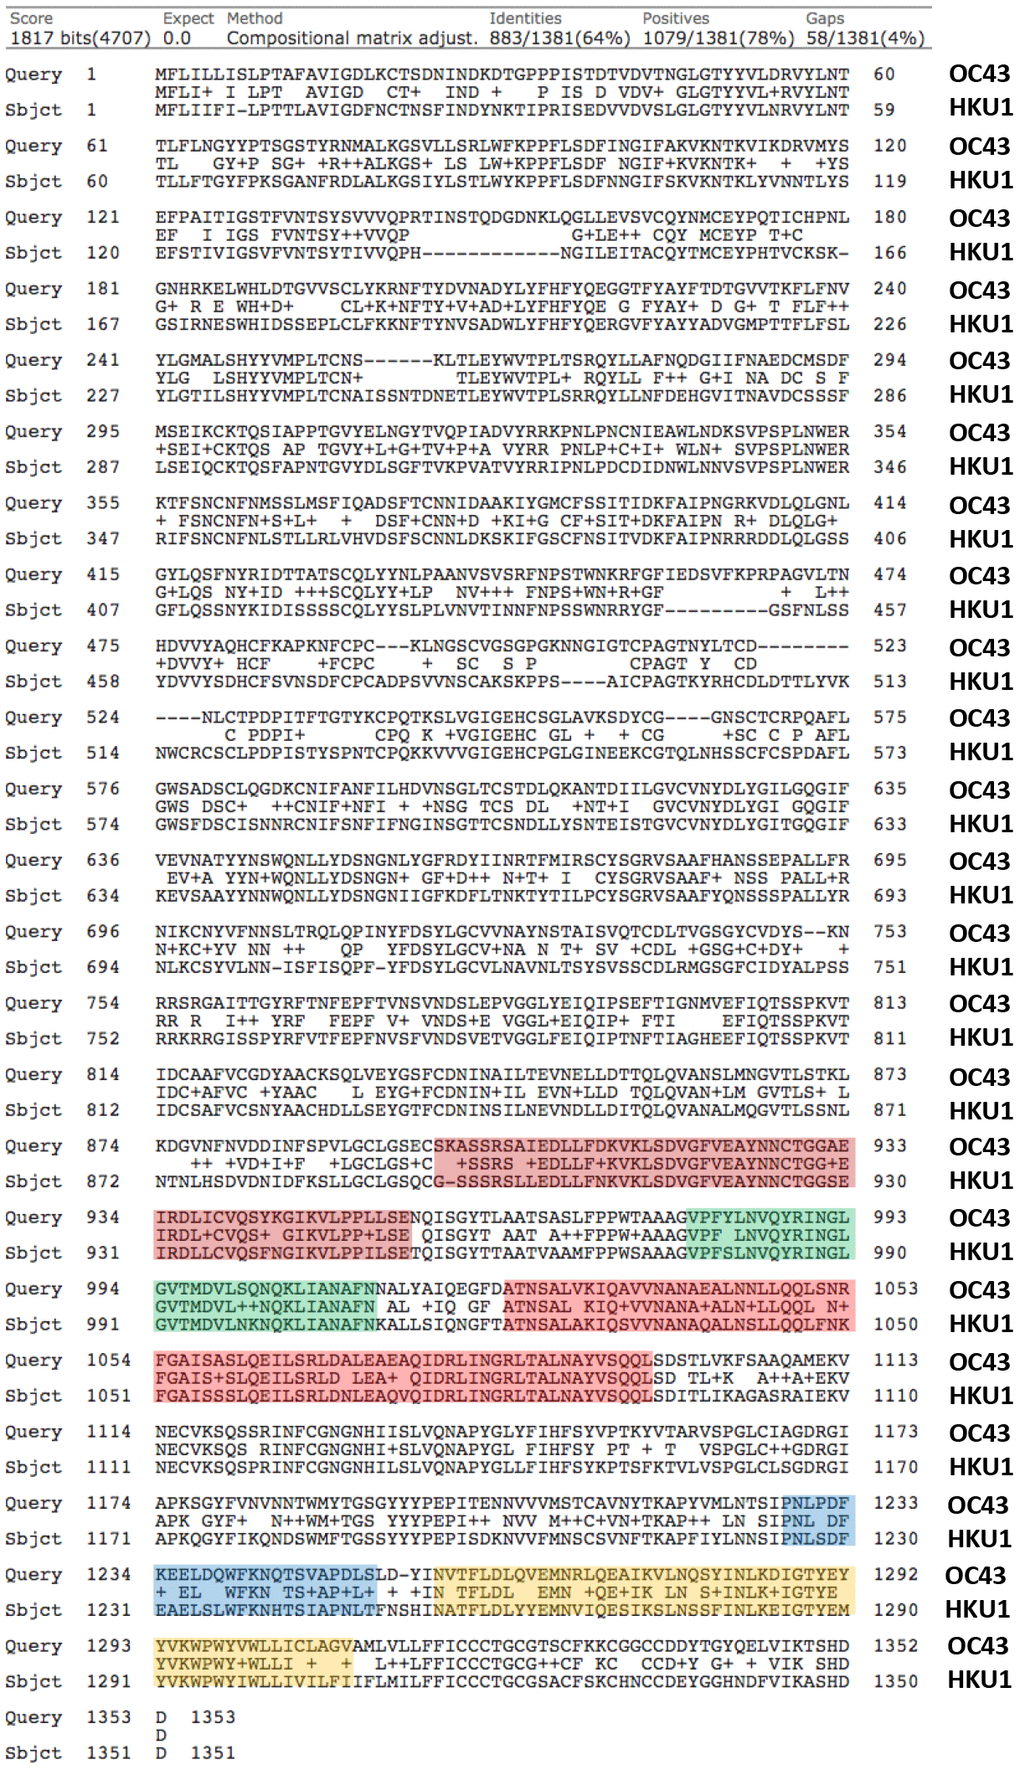 Protein sequence alignments of the Viral Spike Glycoproteins (VSGs) from two related Human Coronaviruses, namely OC43 and HKU1. Note the high homology between OC43 and HKU1, with up to 78% similarity. Generated using the online program BLASTP, by pairwise sequence analysis. The same potentially shared epitopes, highlighted in color in Figure 1, are also highlighted here, for comparison.